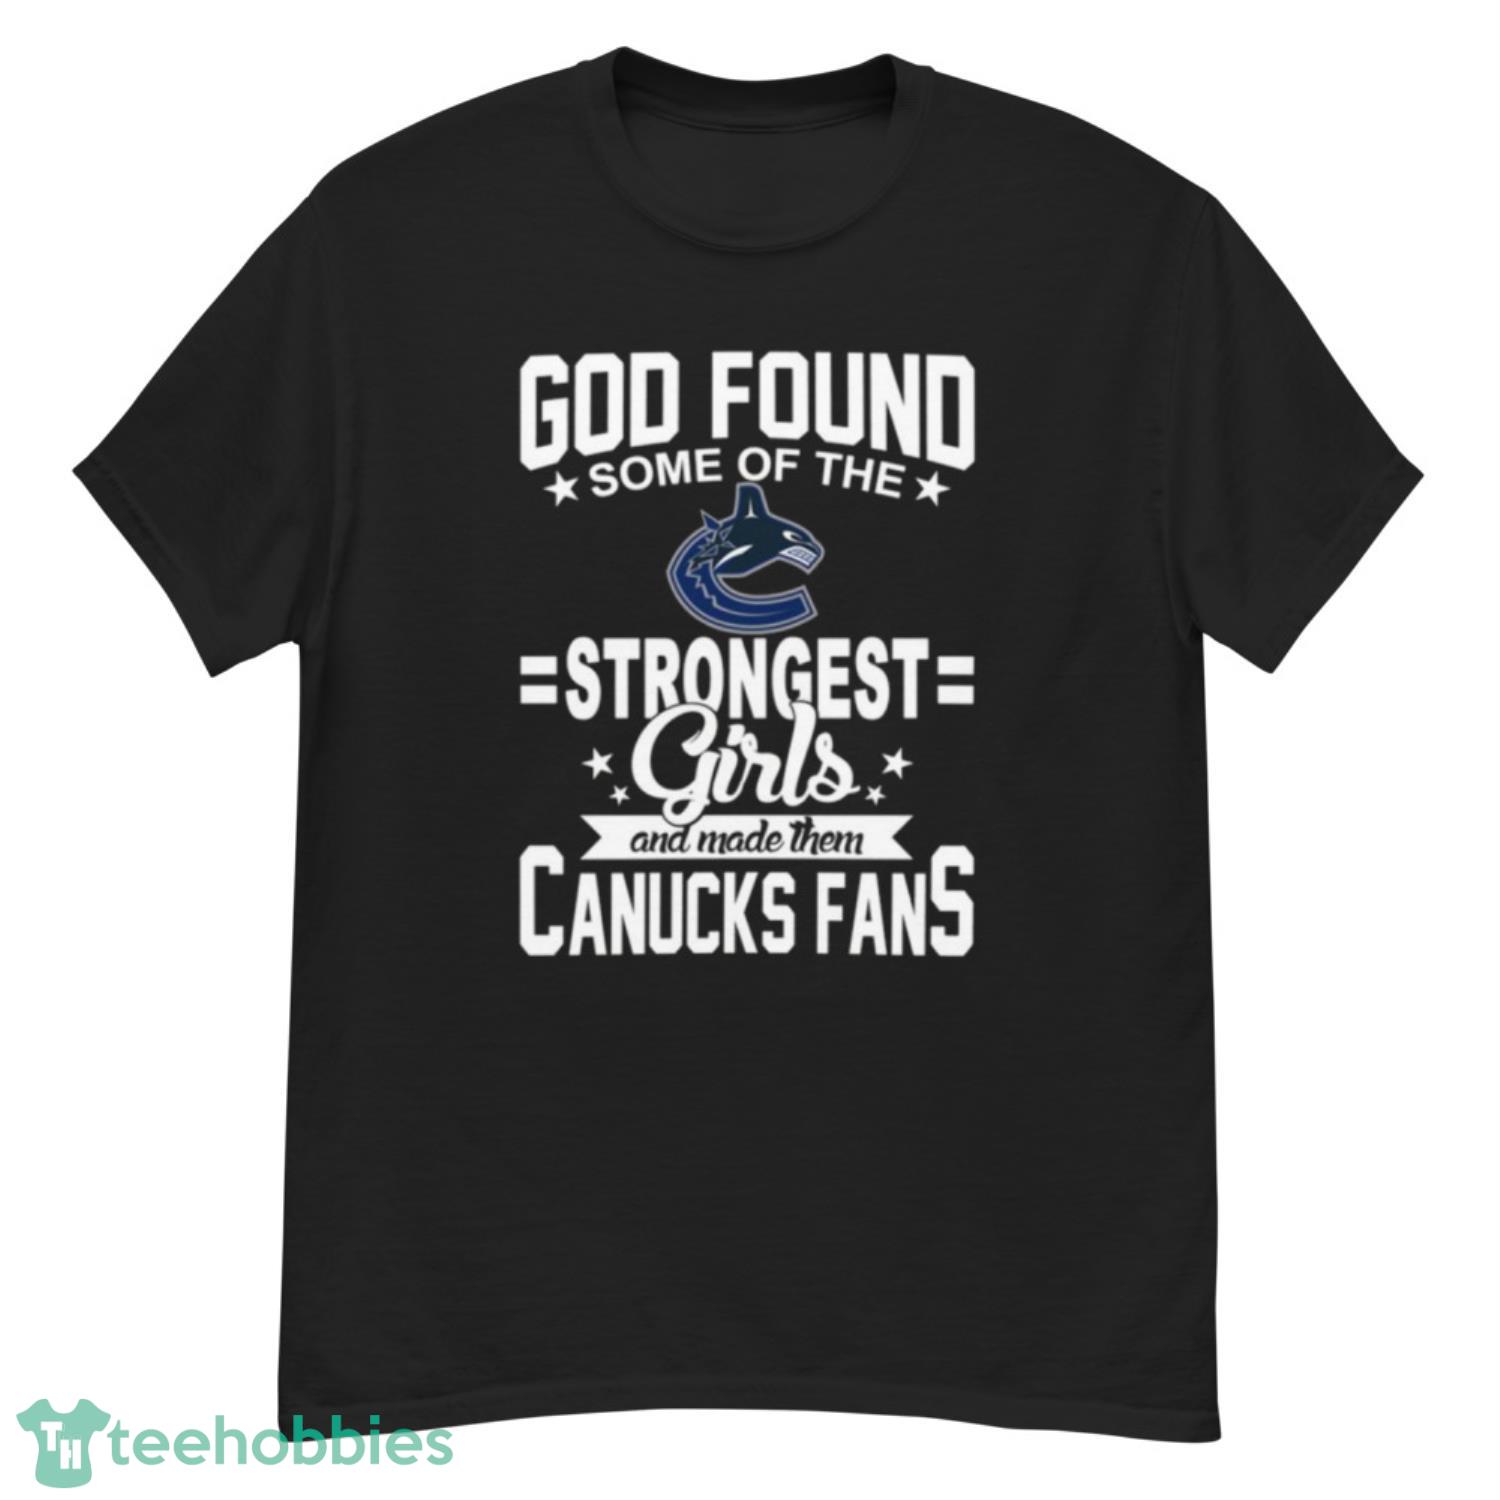 Vancouver Canucks NHL Football God Found Some Of The Strongest Girls Adoring Fans T Shirt - G500 Men’s Classic T-Shirt